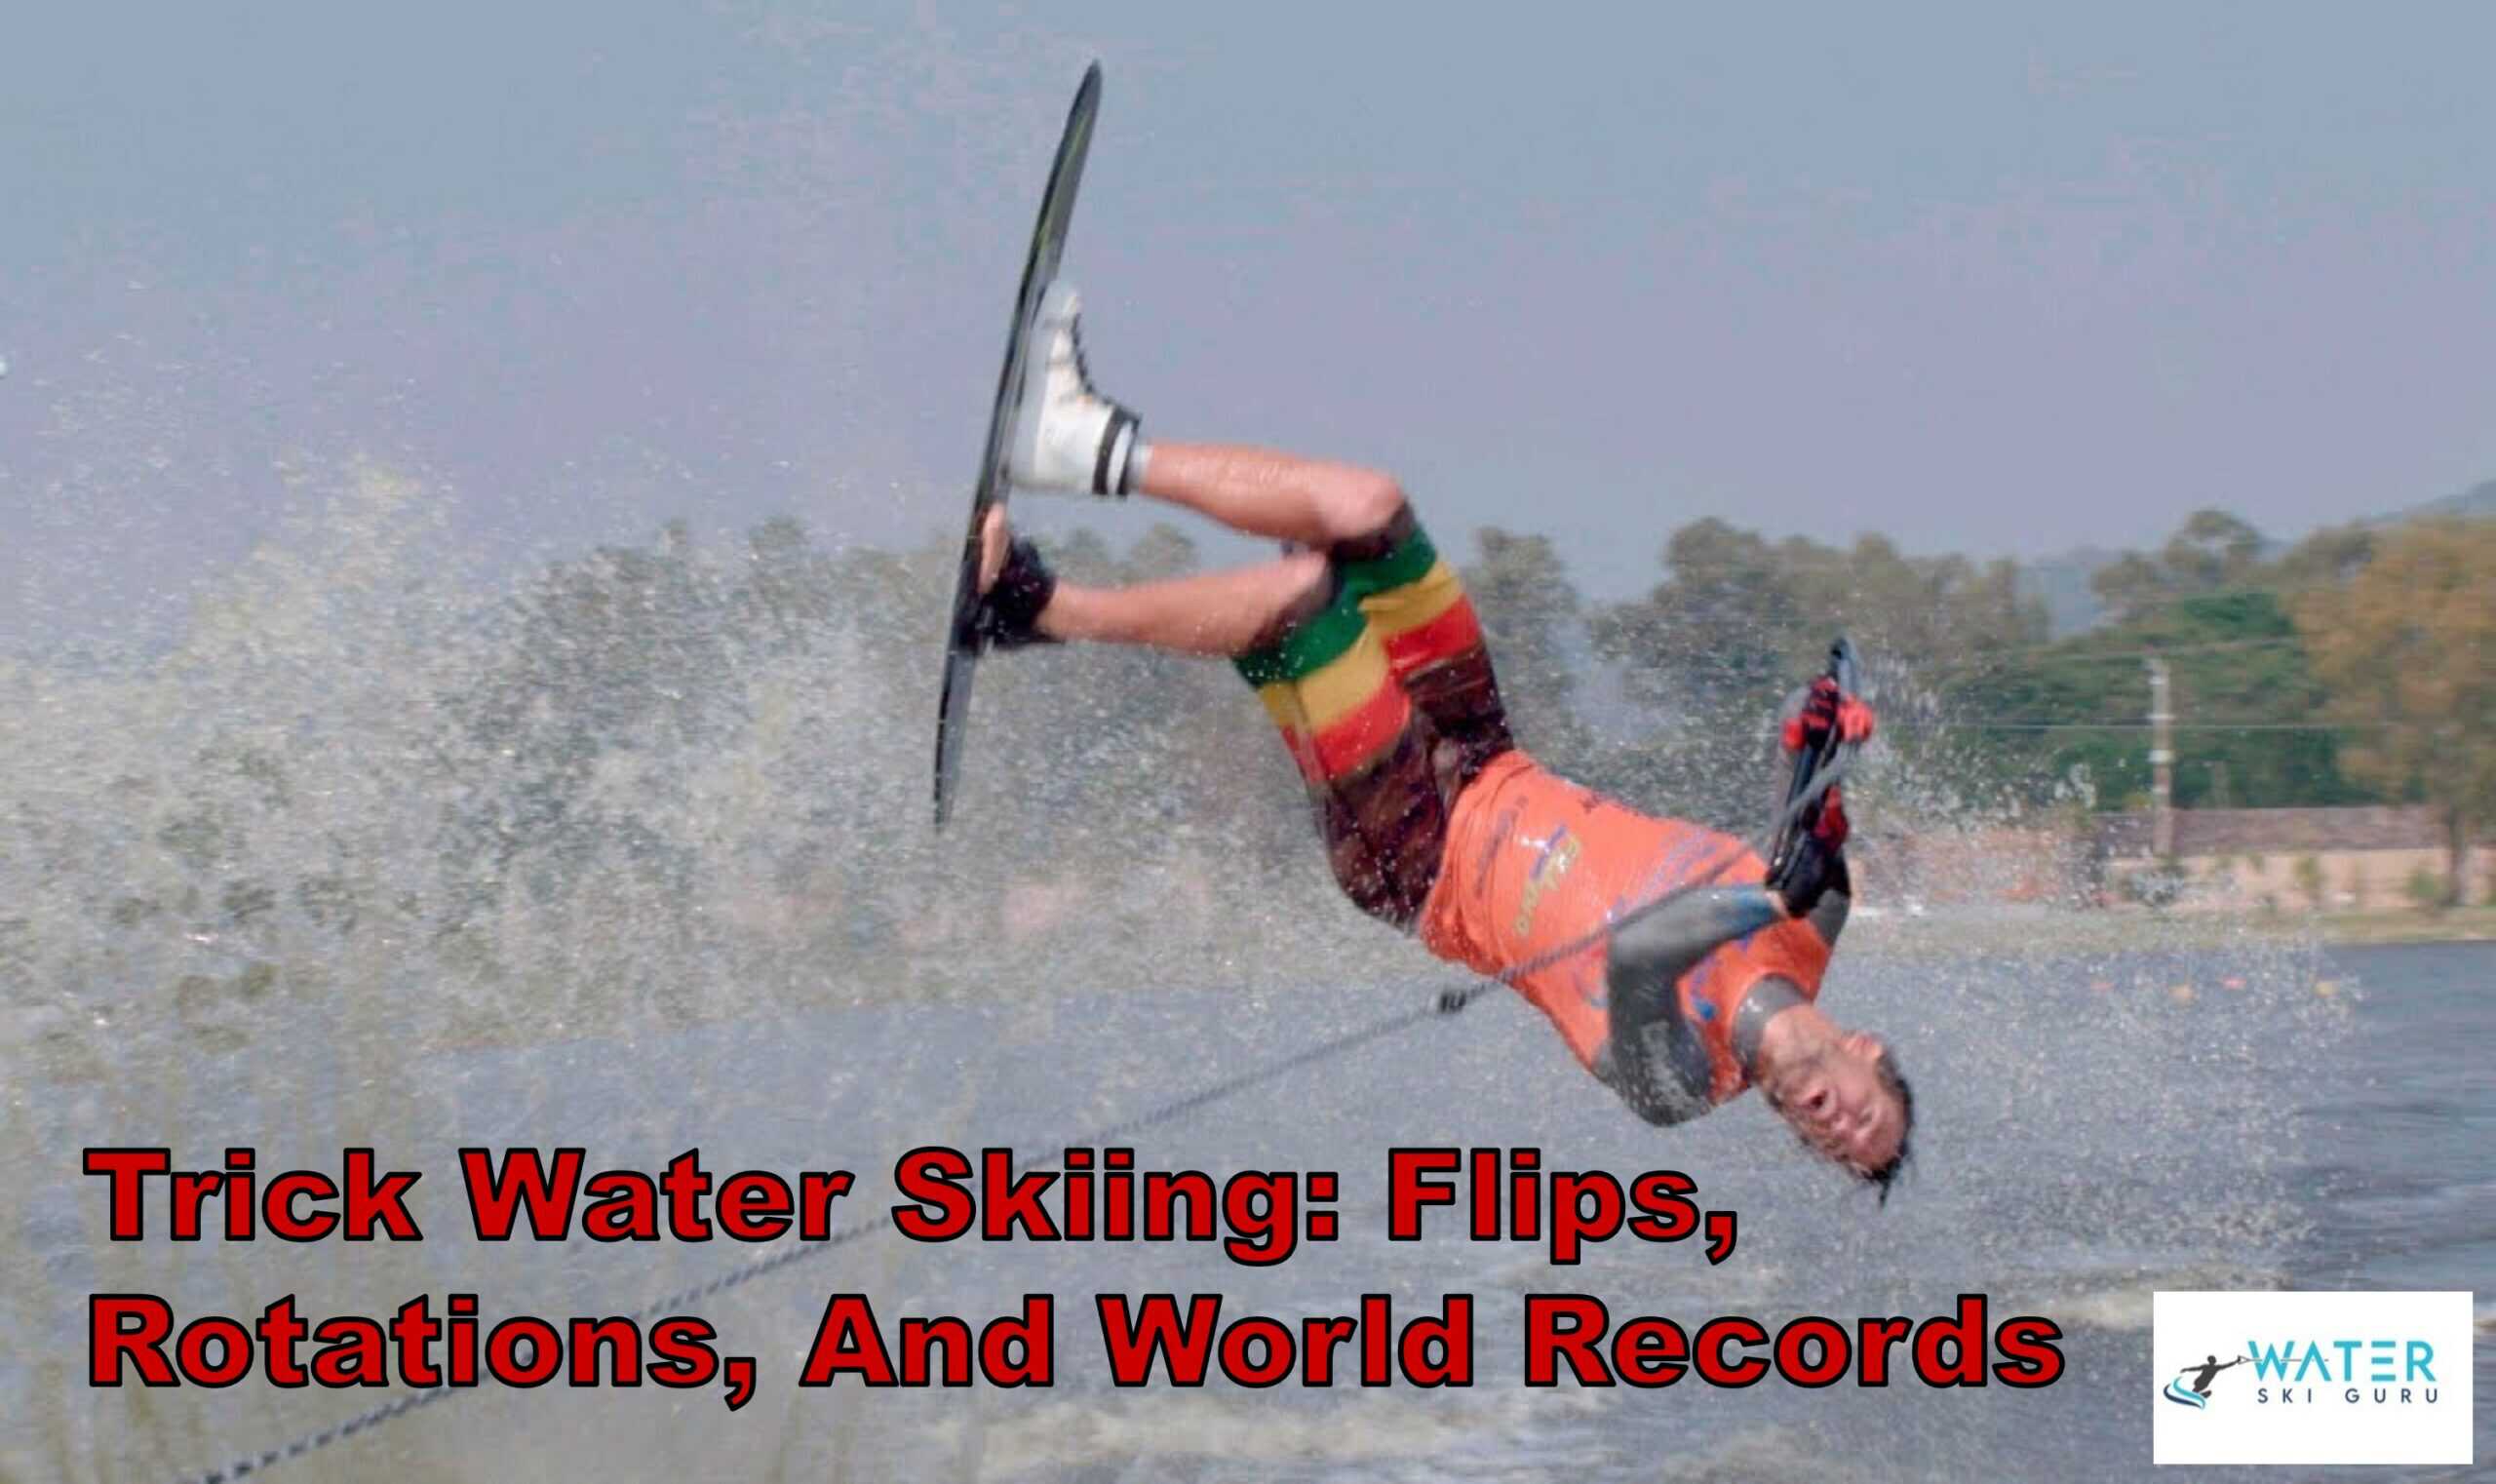 Trick Water Skiing: Flips, Rotations, And World Records